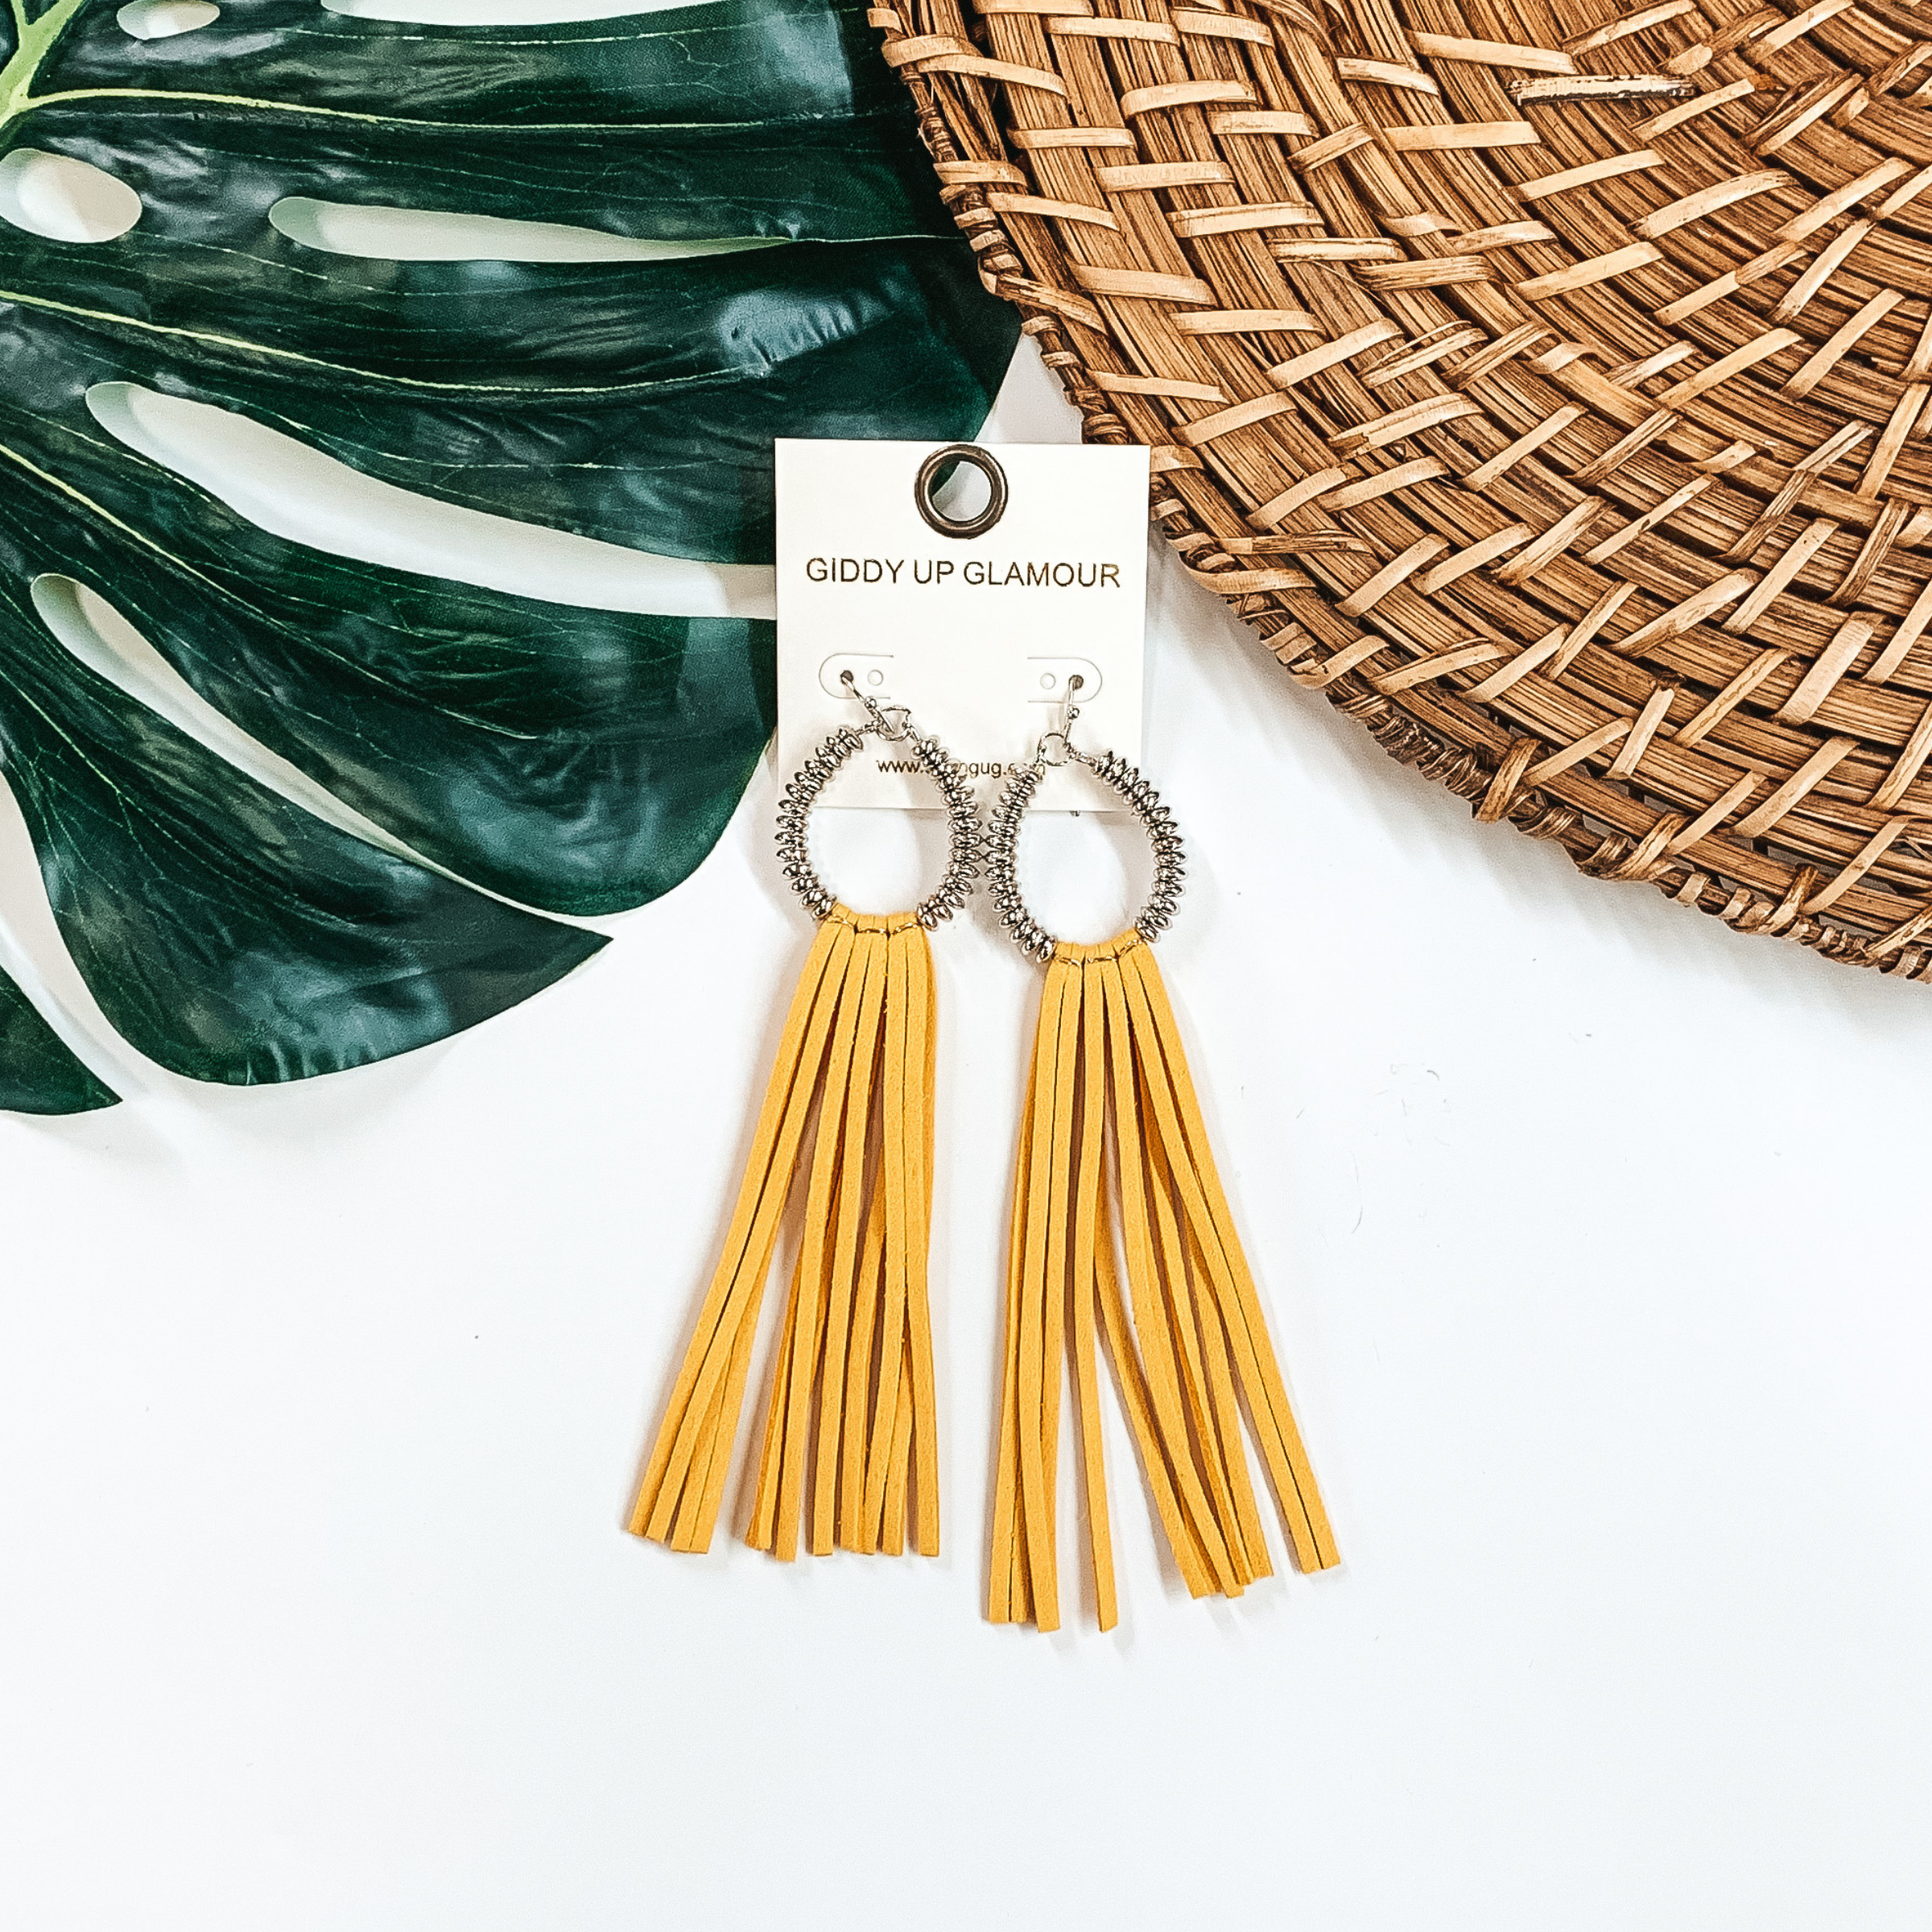 Silver Tone Metal Beaded Hoop Earrings with Yellow Tassels - Giddy Up Glamour Boutique